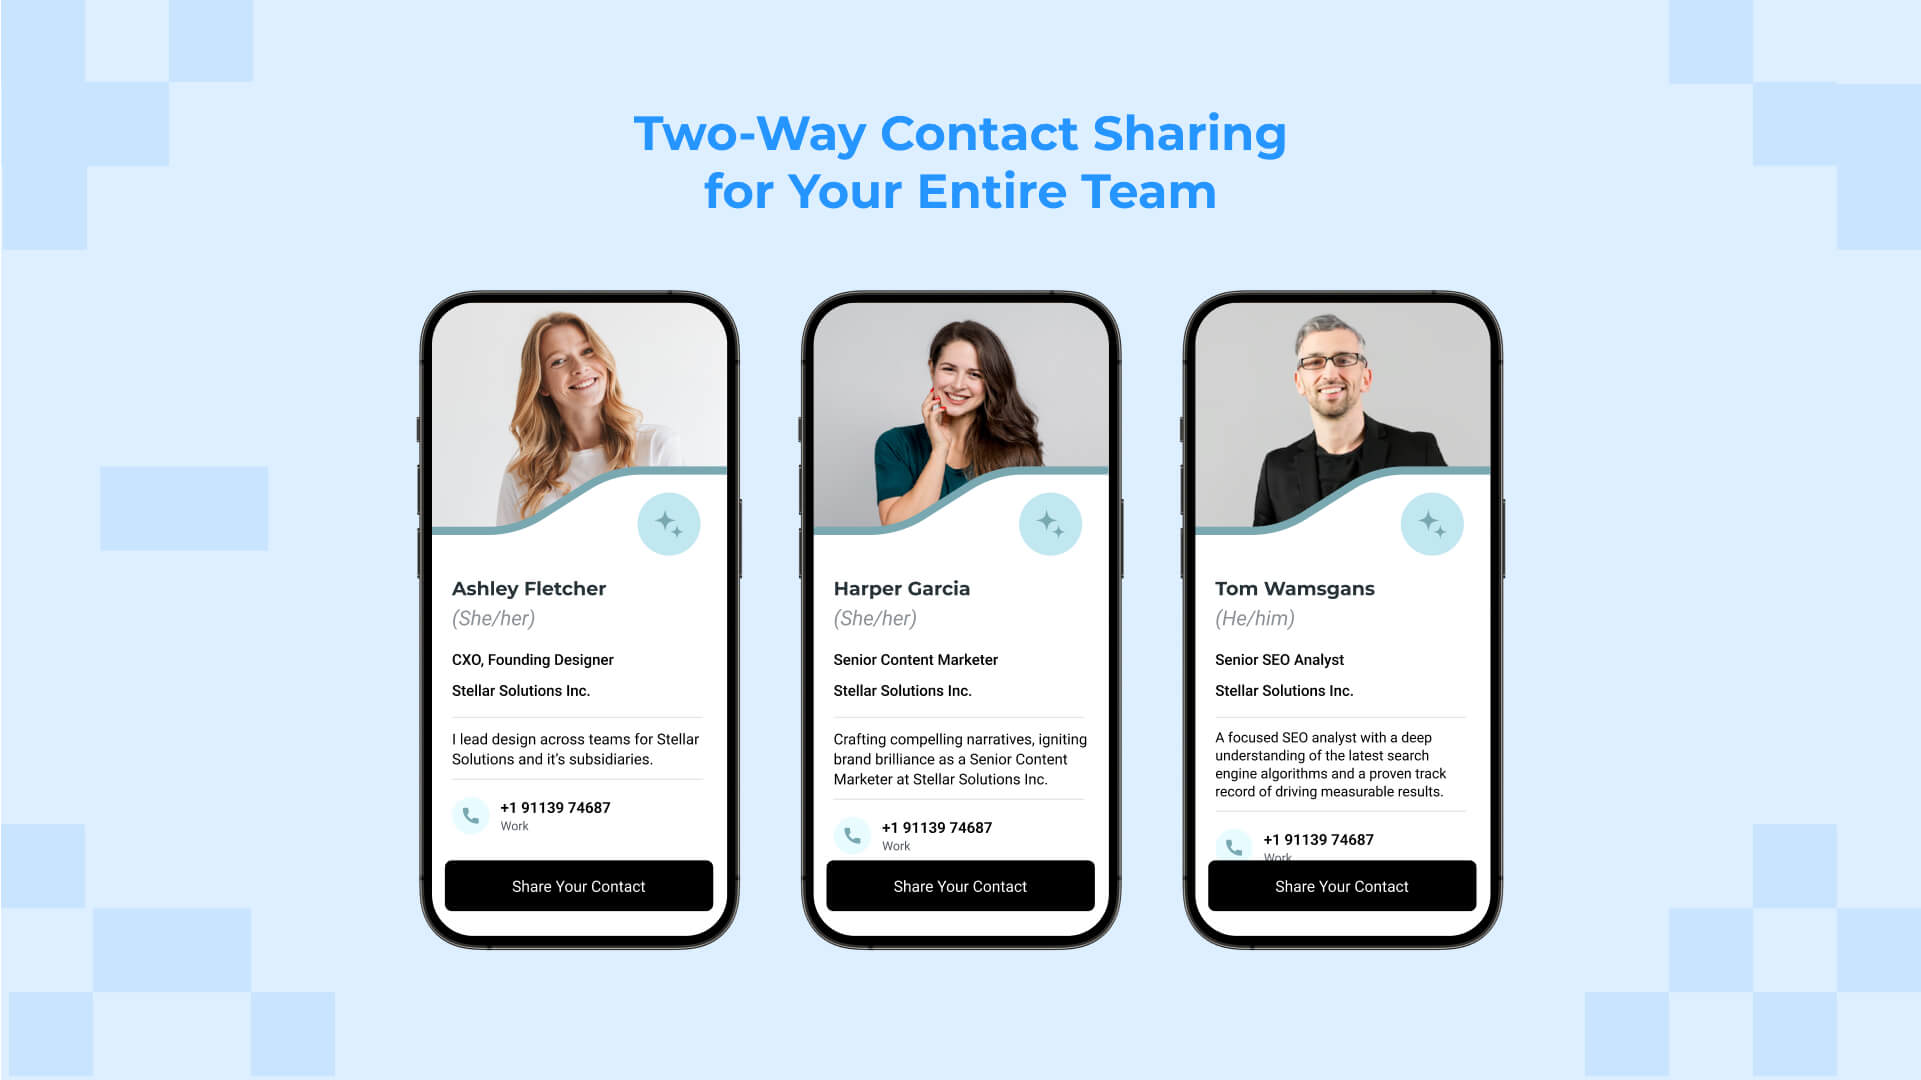 How To Enable Two-Way Contact Sharing for Your Team’s Digital Business Cards [In a Single Click]